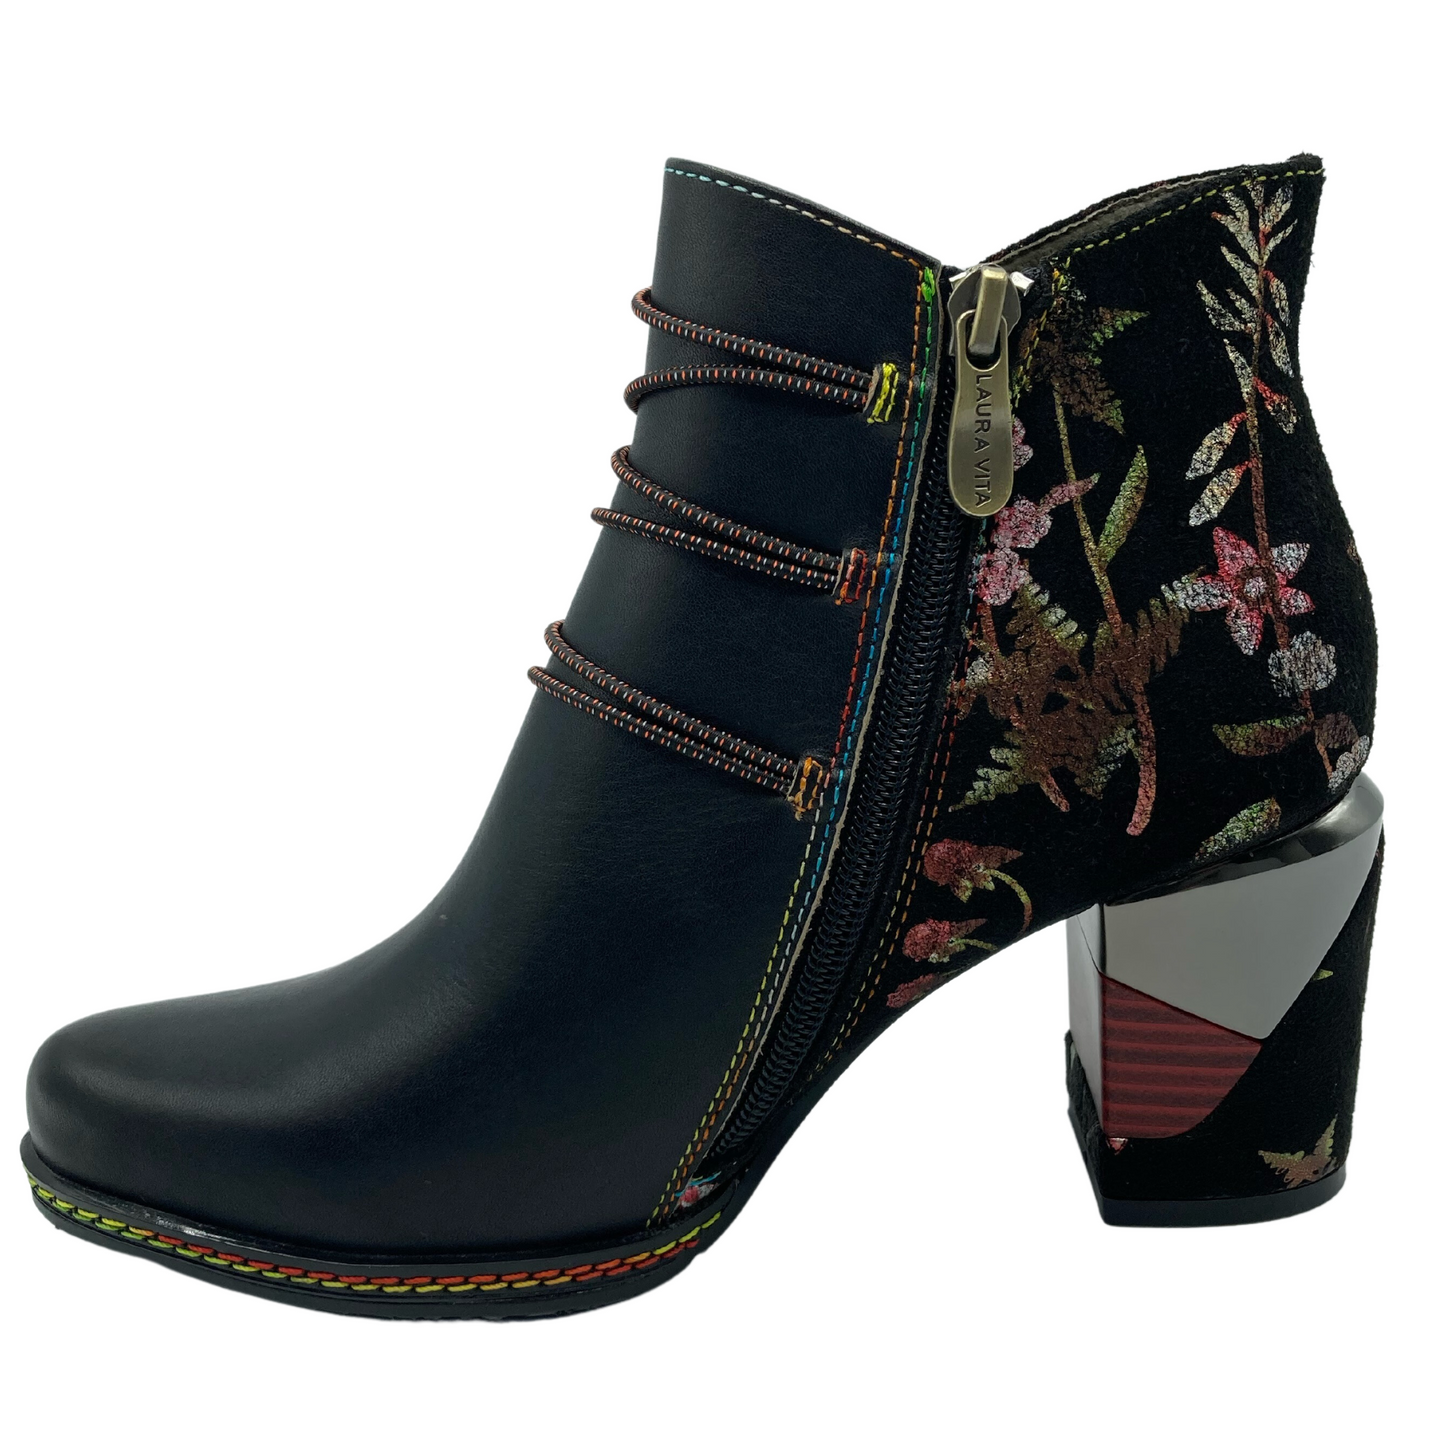 Left facing view of floral and black leather ankle boot with side zipper closure and block heel